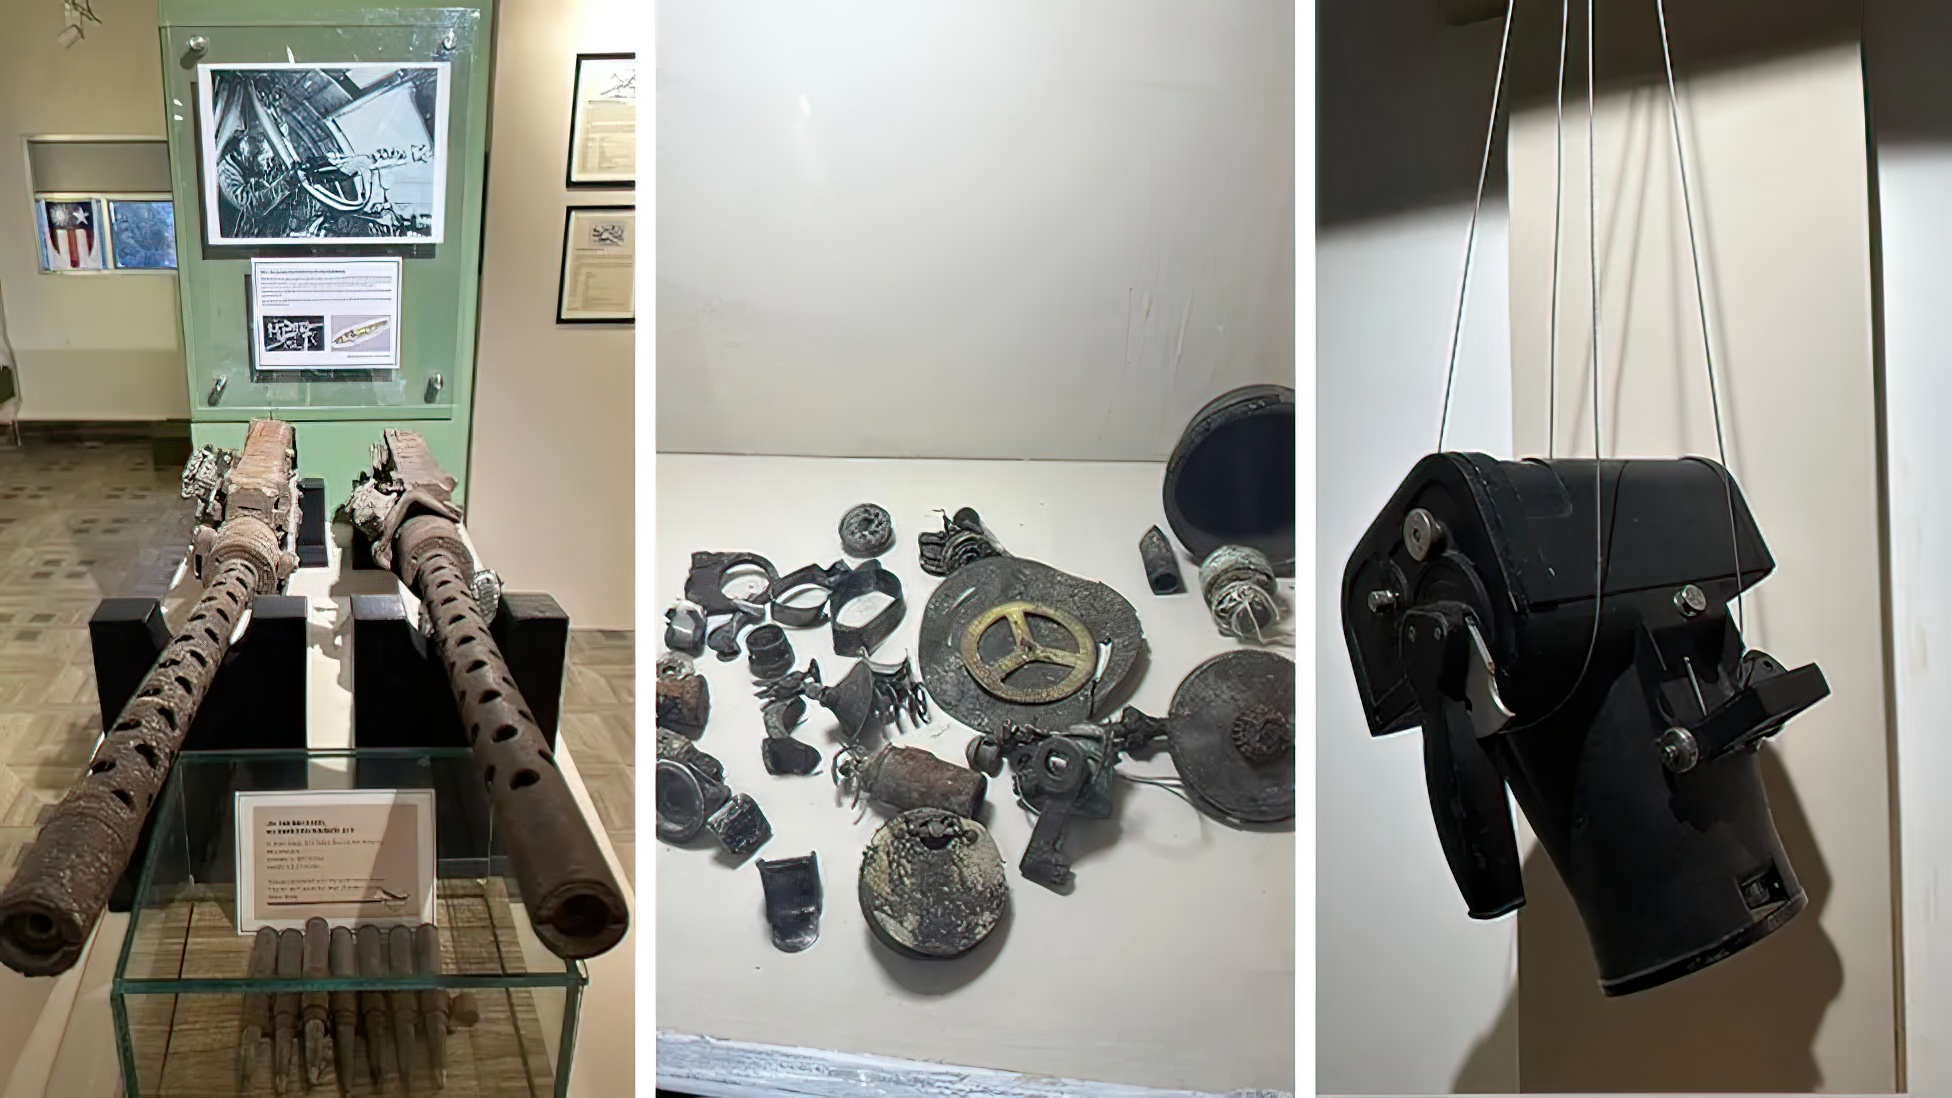 A machine gun, pieces of debris, a camera: some of the recovered artefacts at the newly opened museum